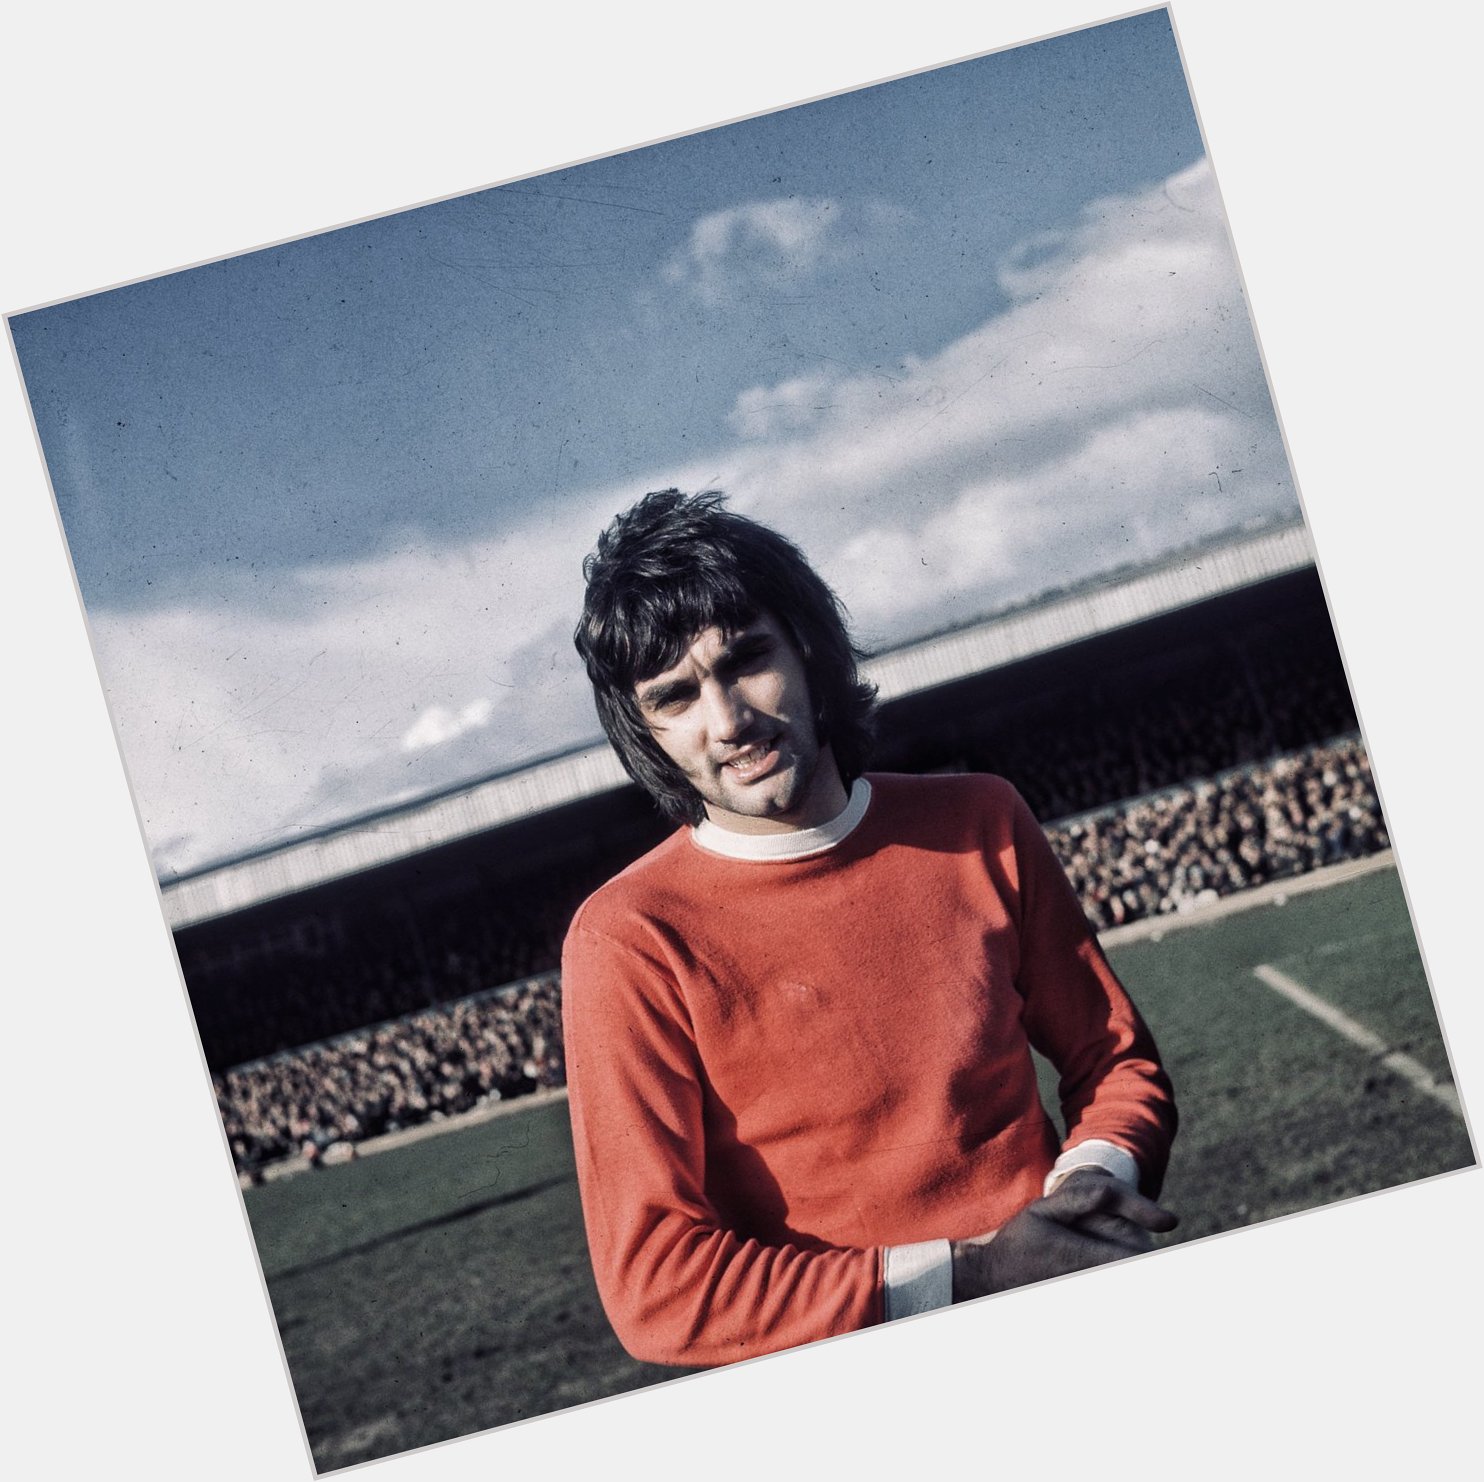 Happy Birthday to George Best, who would have been 73 today. Legend! 